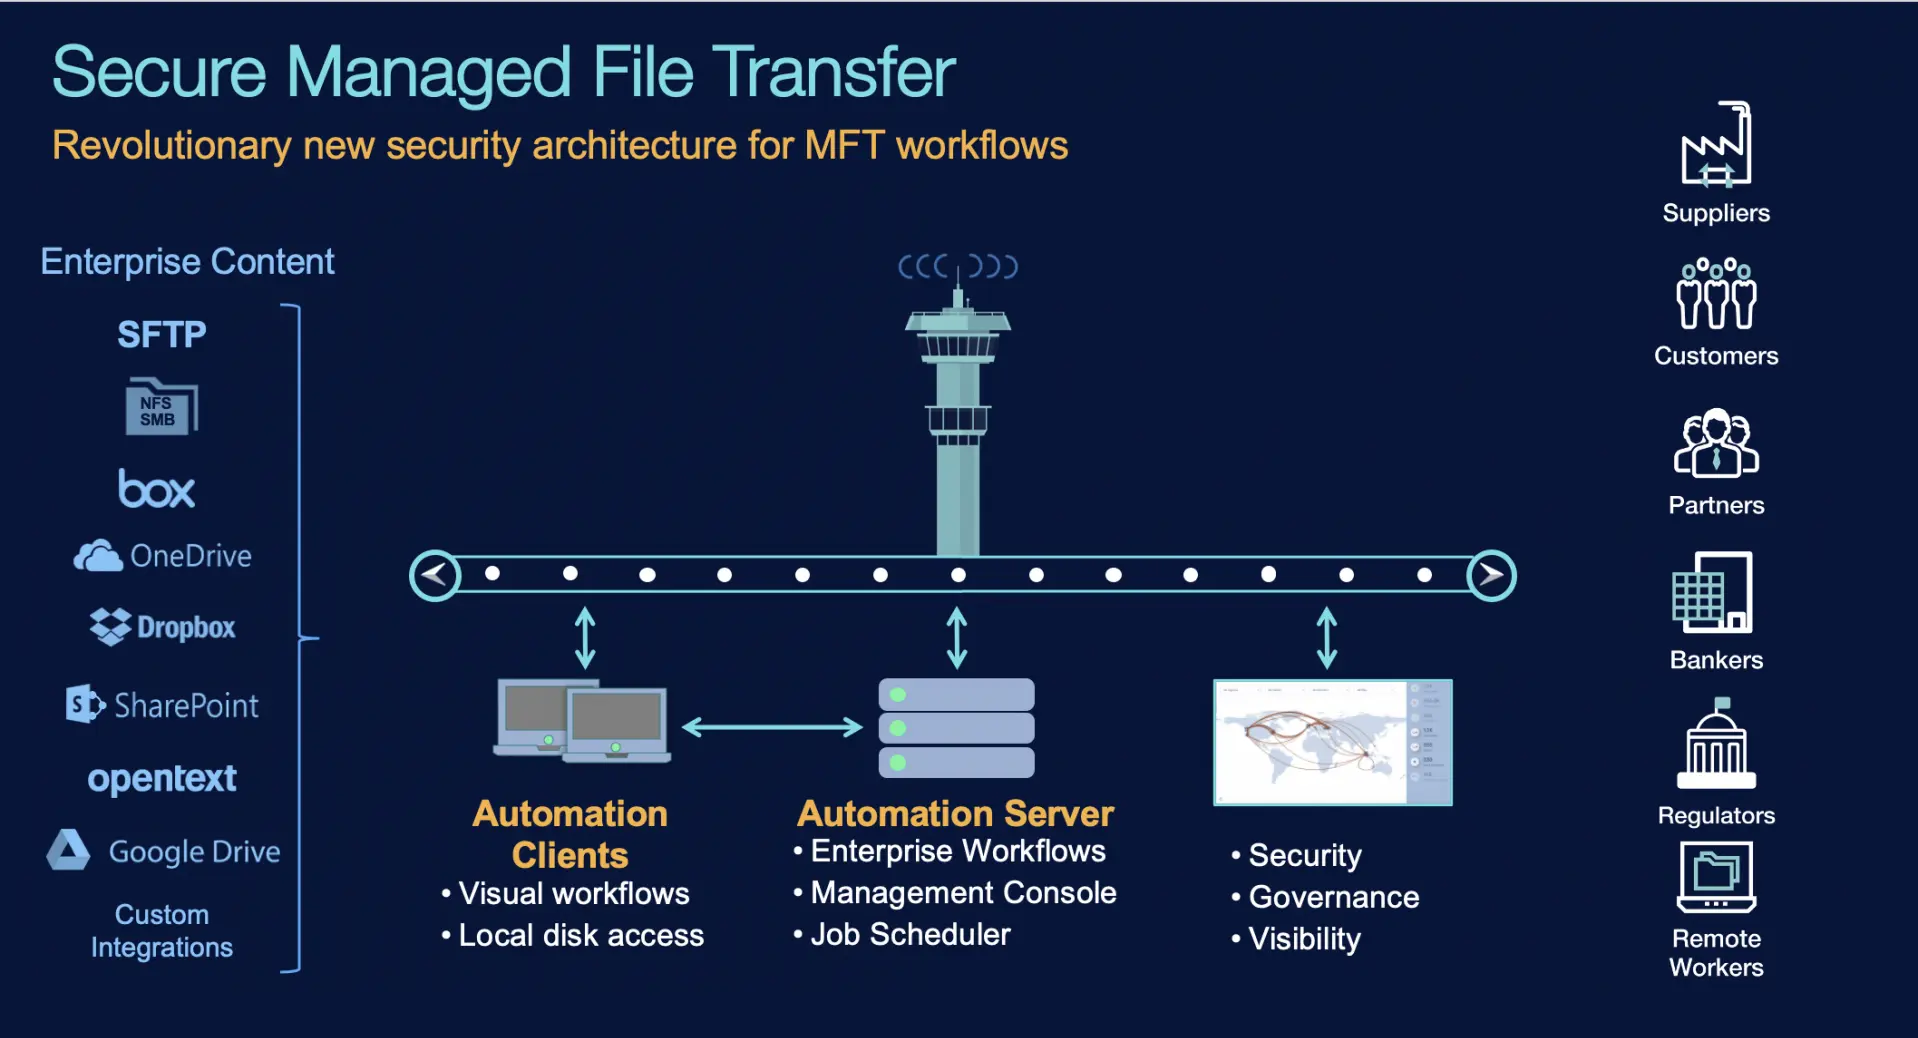 Next Generation Secure Managed File Transfer Solution Overview